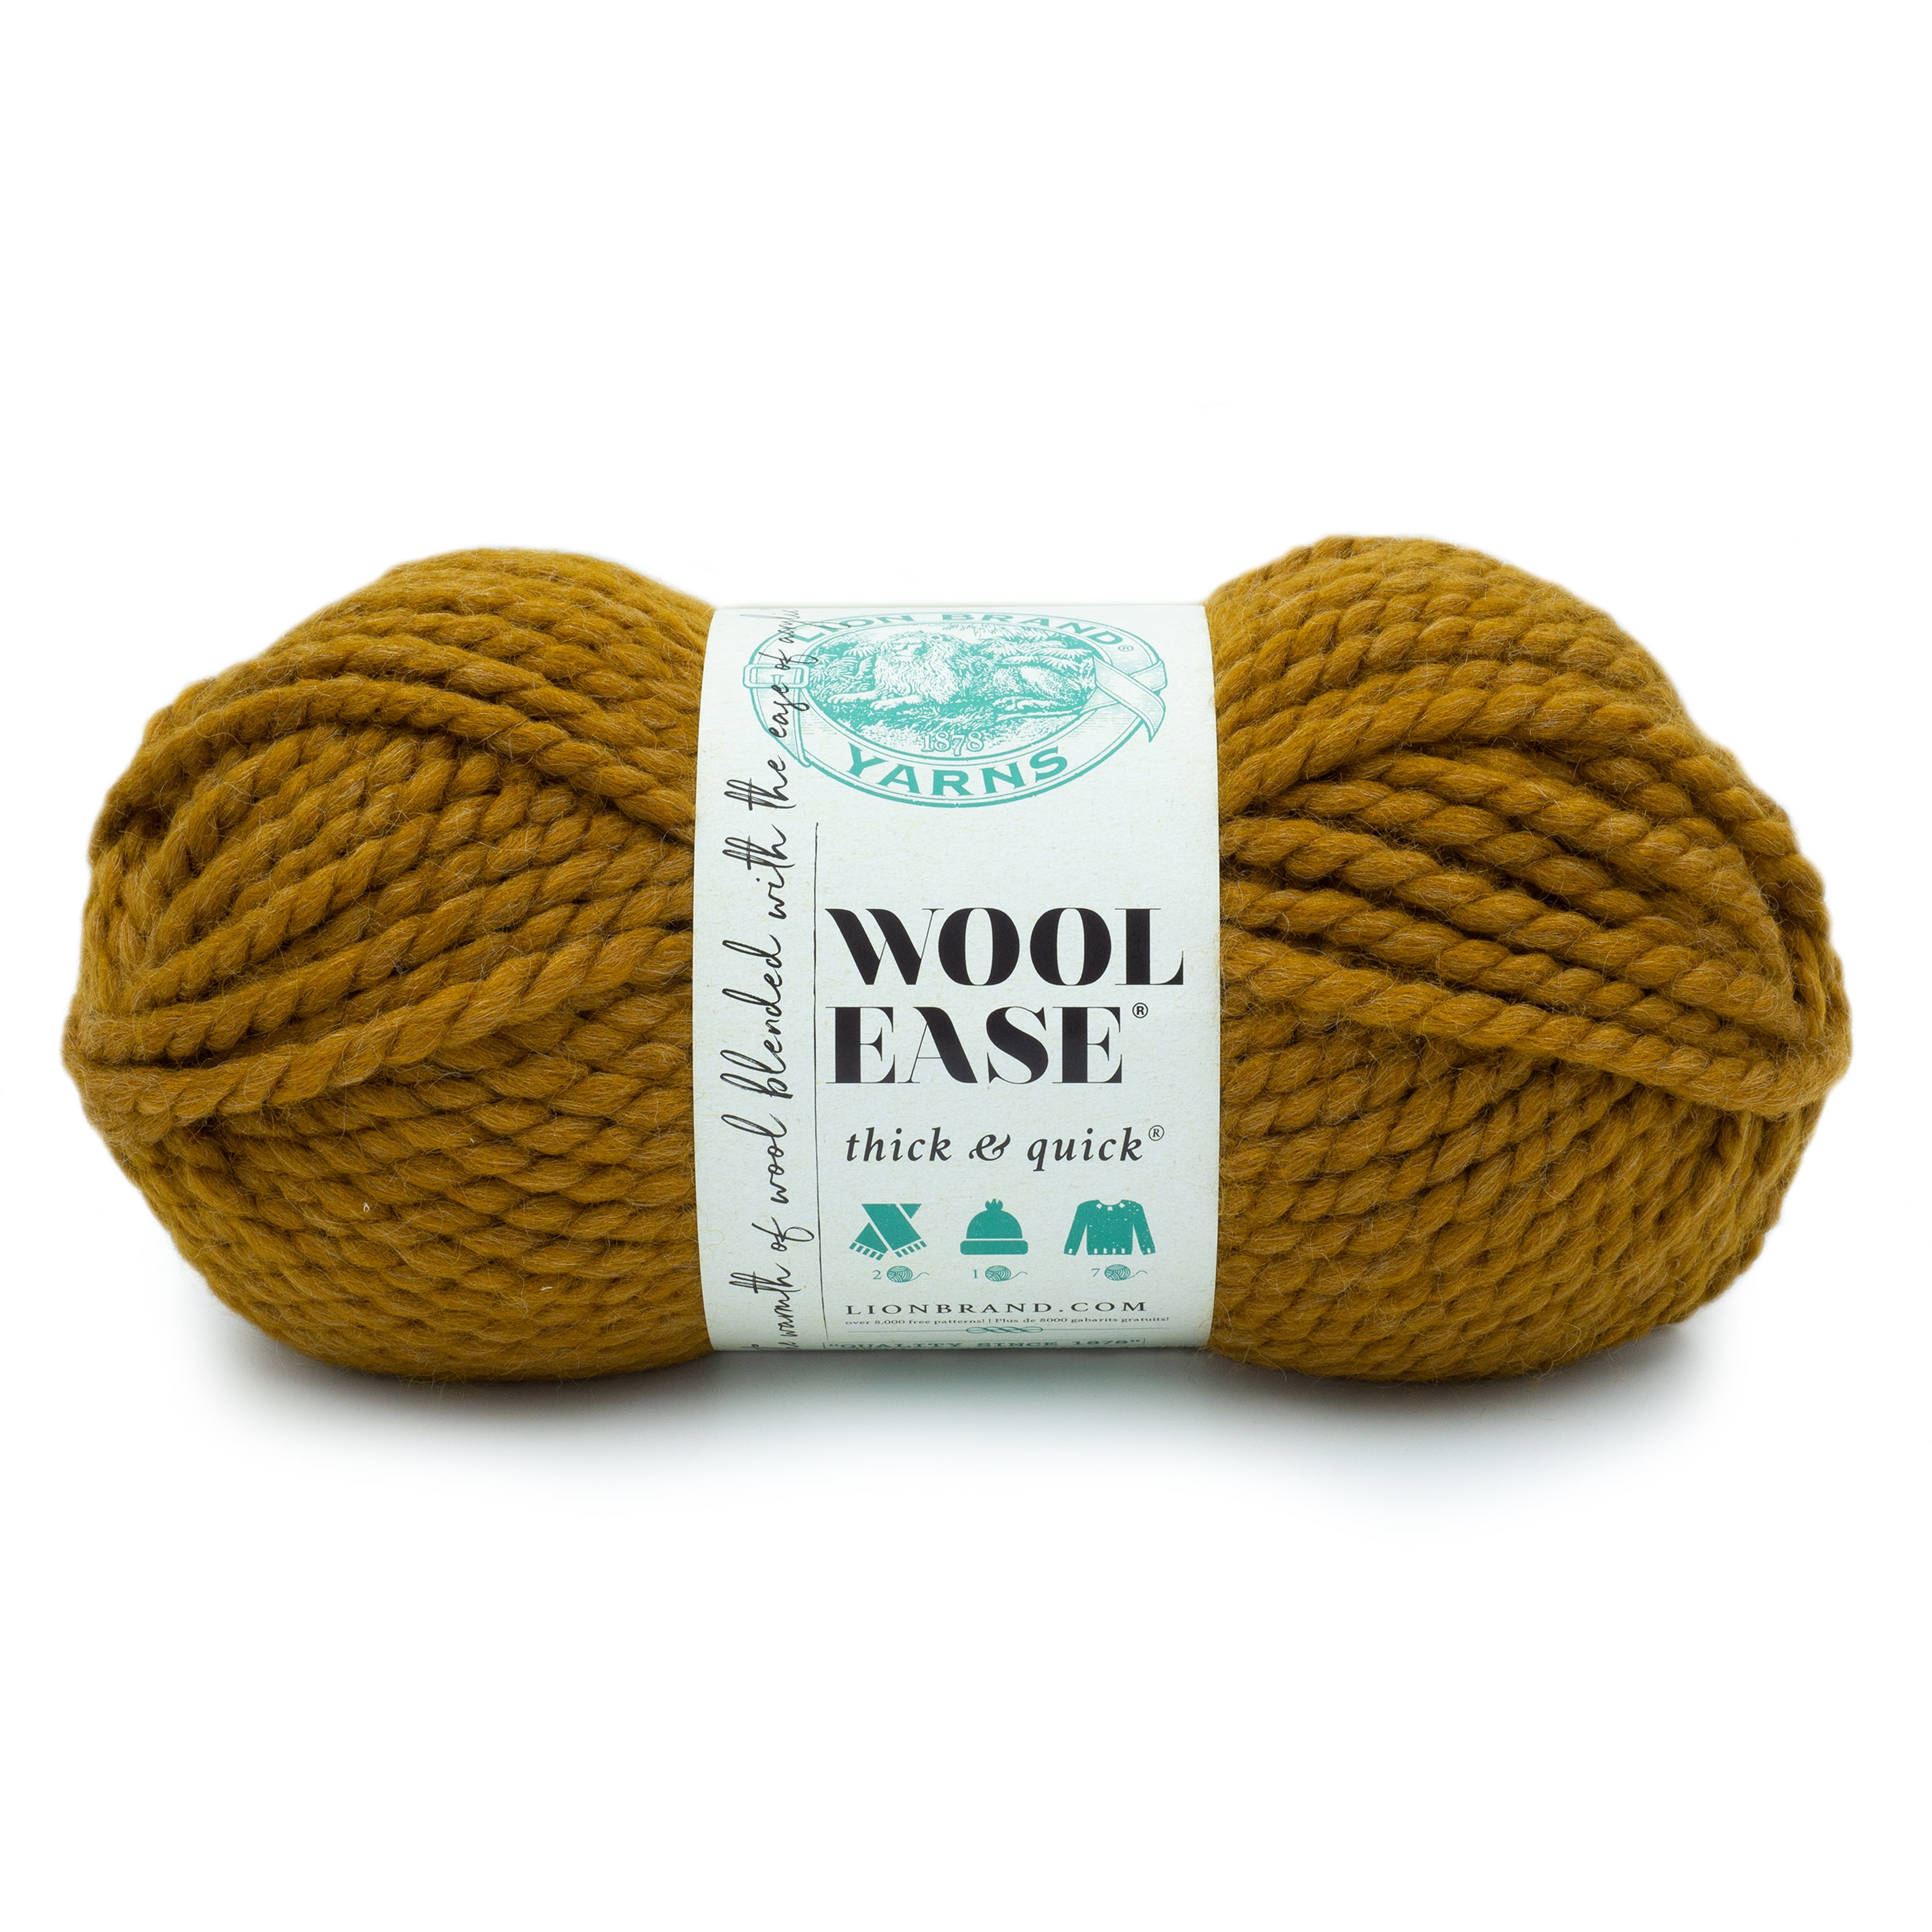 Lion Brand Wool-Ease Thick & Quick Yarn Flax